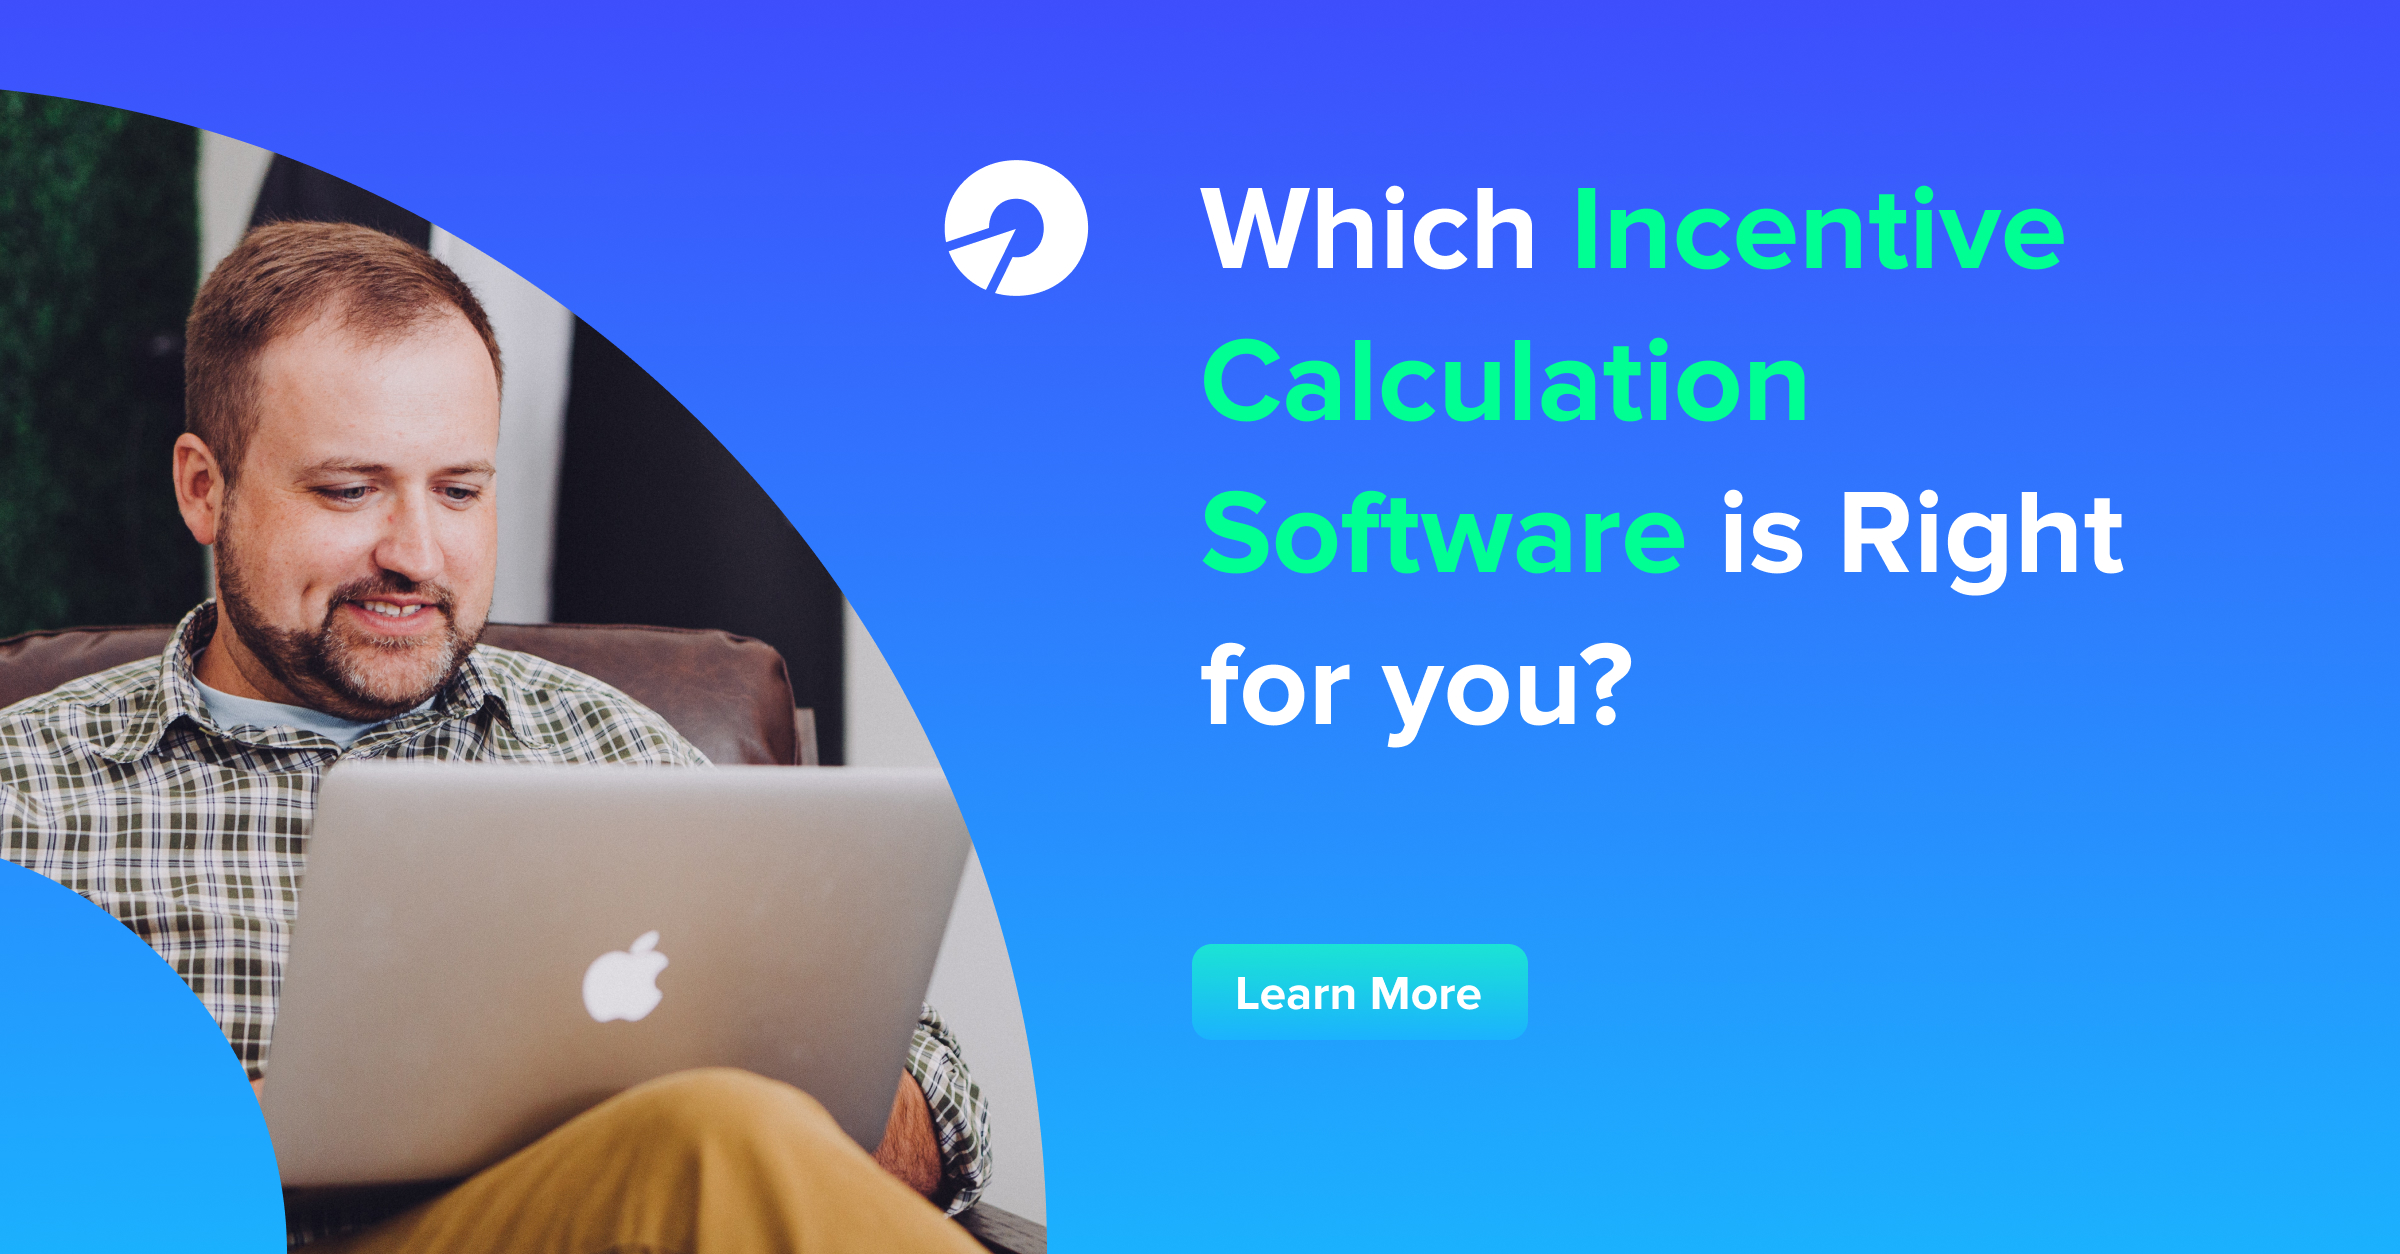 Which Incentive Calculation Software is Right for you?